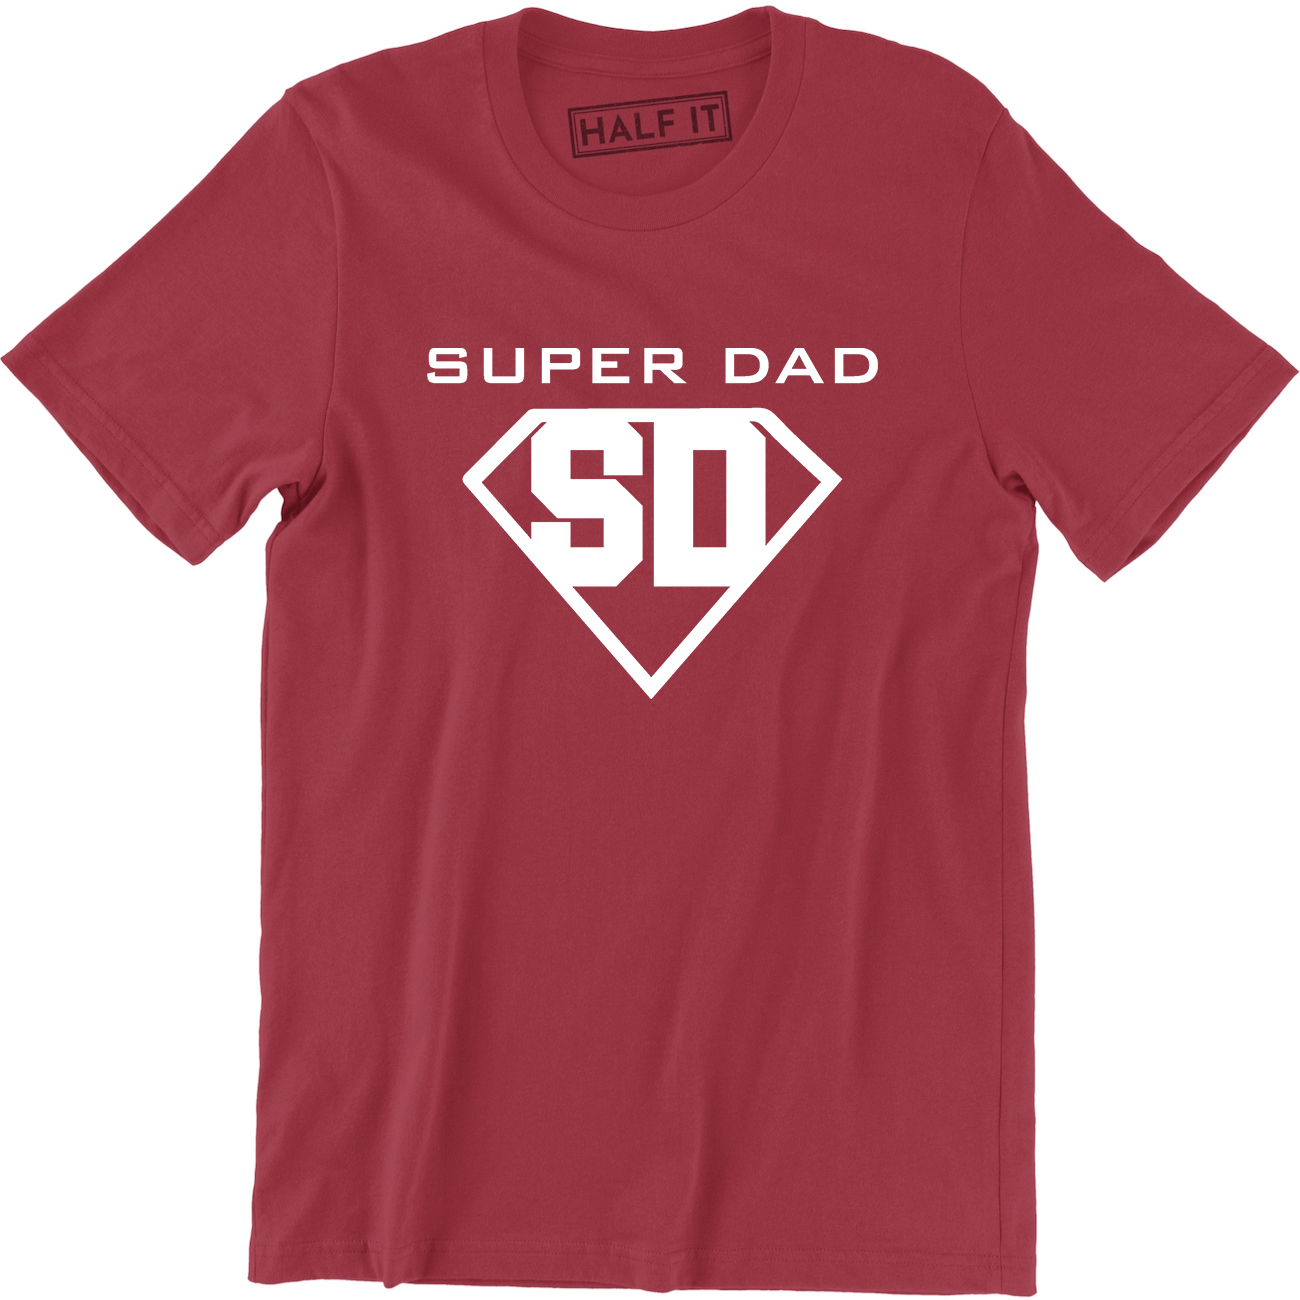 Super Dad My Dad My Hero Father Day Birthday Gift Present Daddy Tee Shirt - image 1 of 4